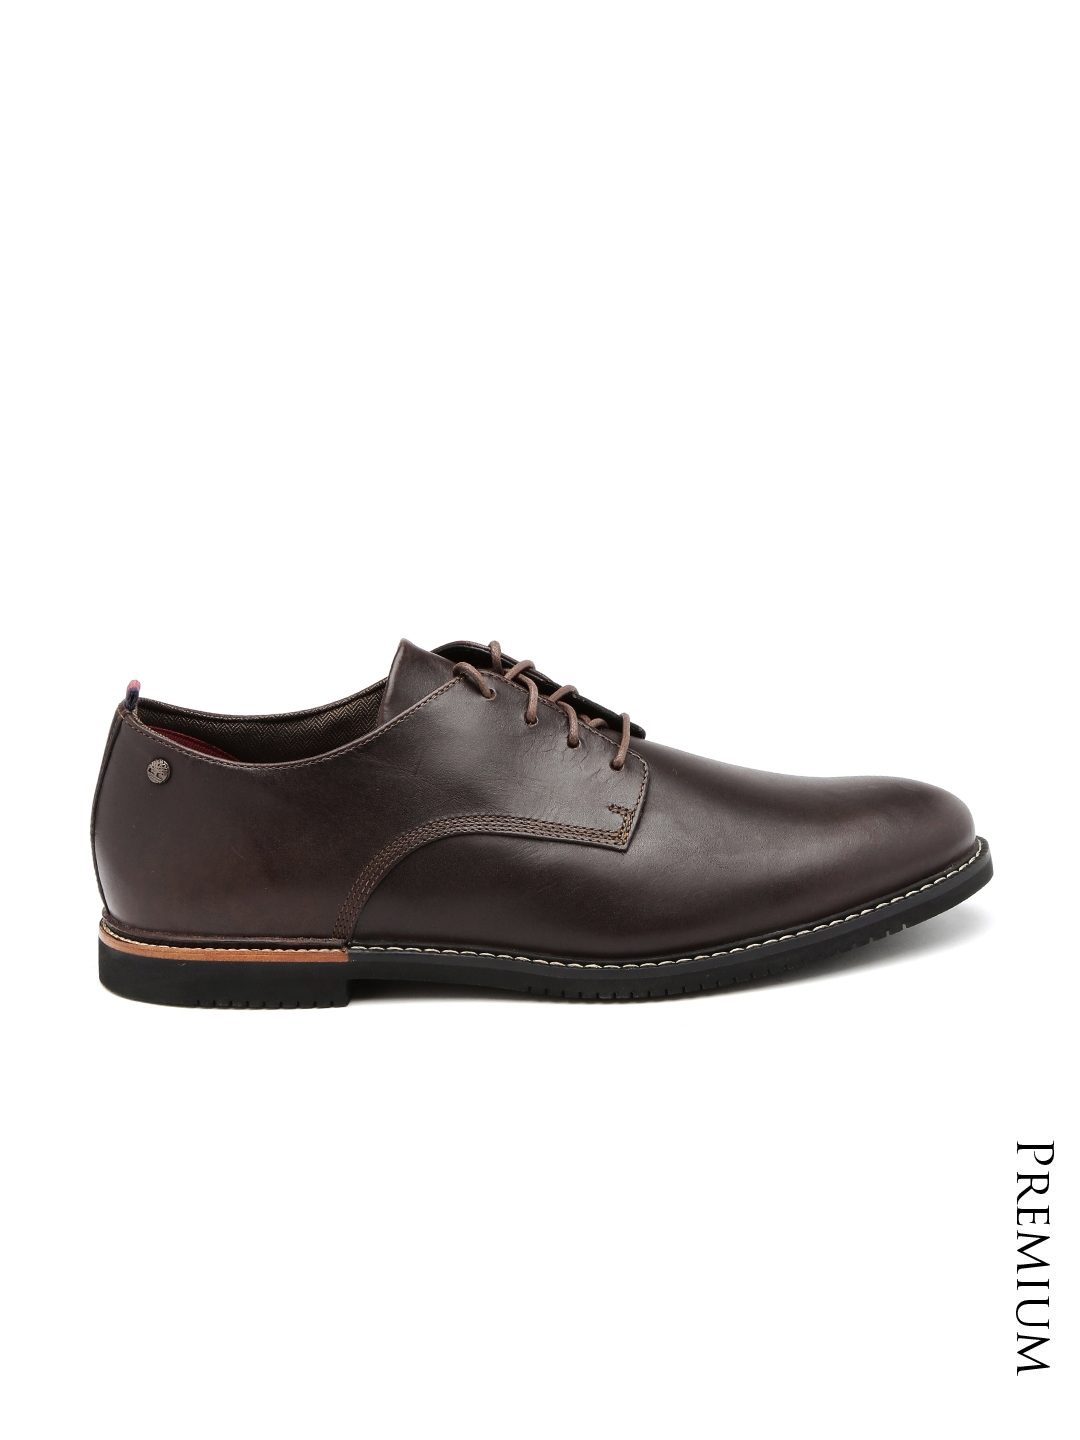 timberland men's formal shoes